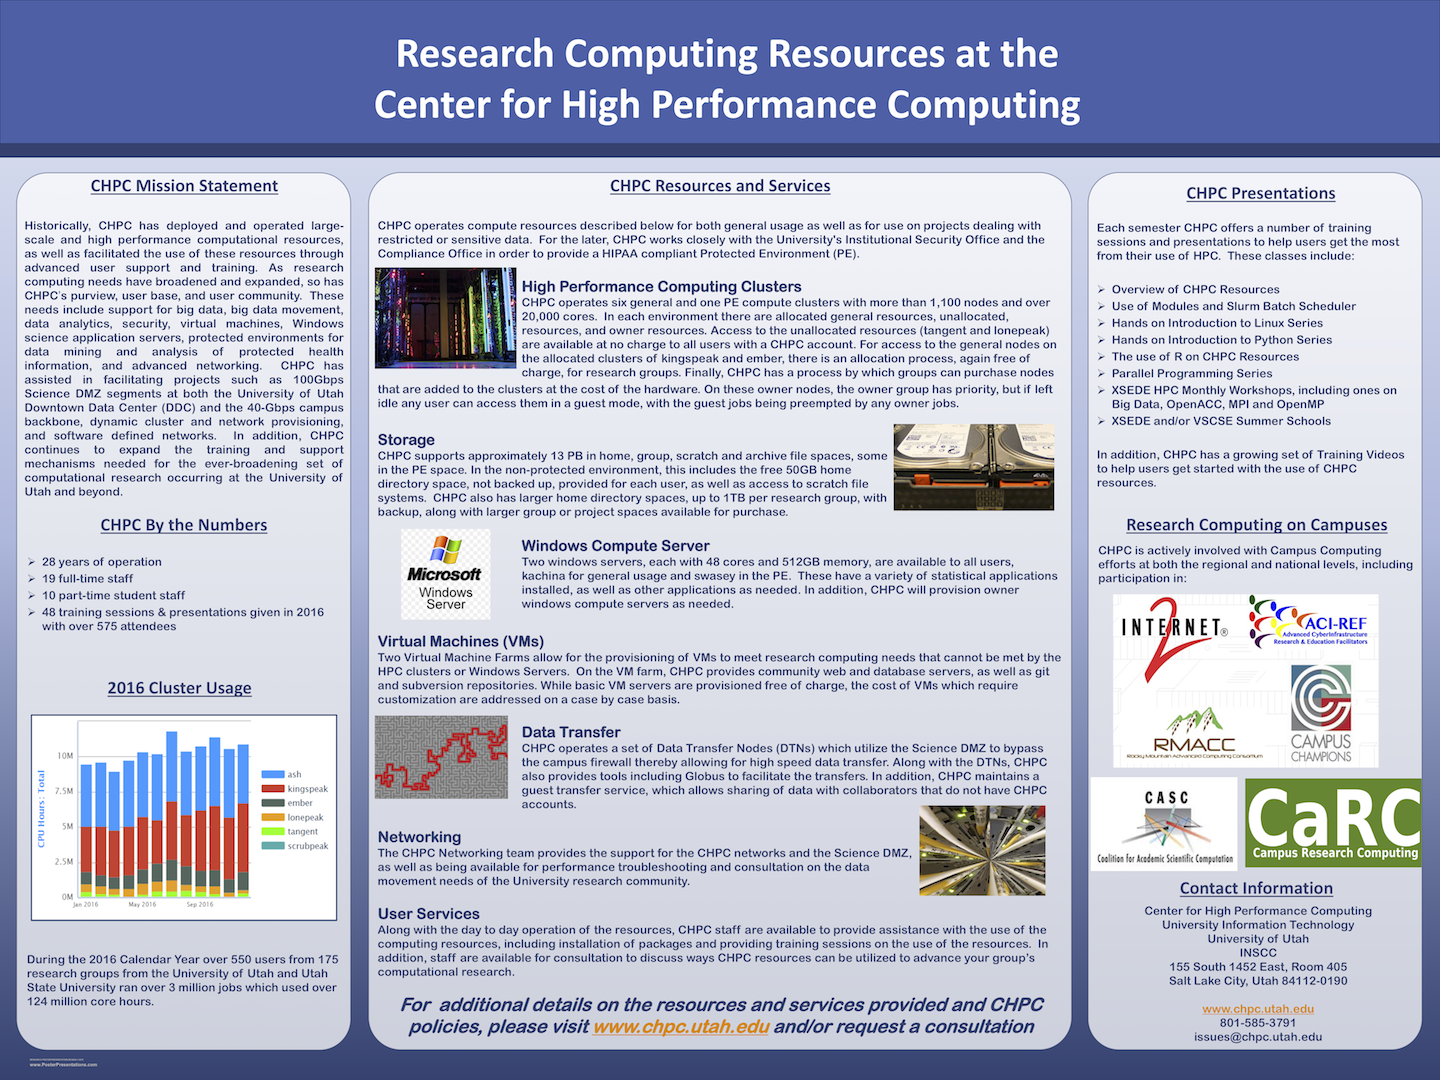 Example Poster